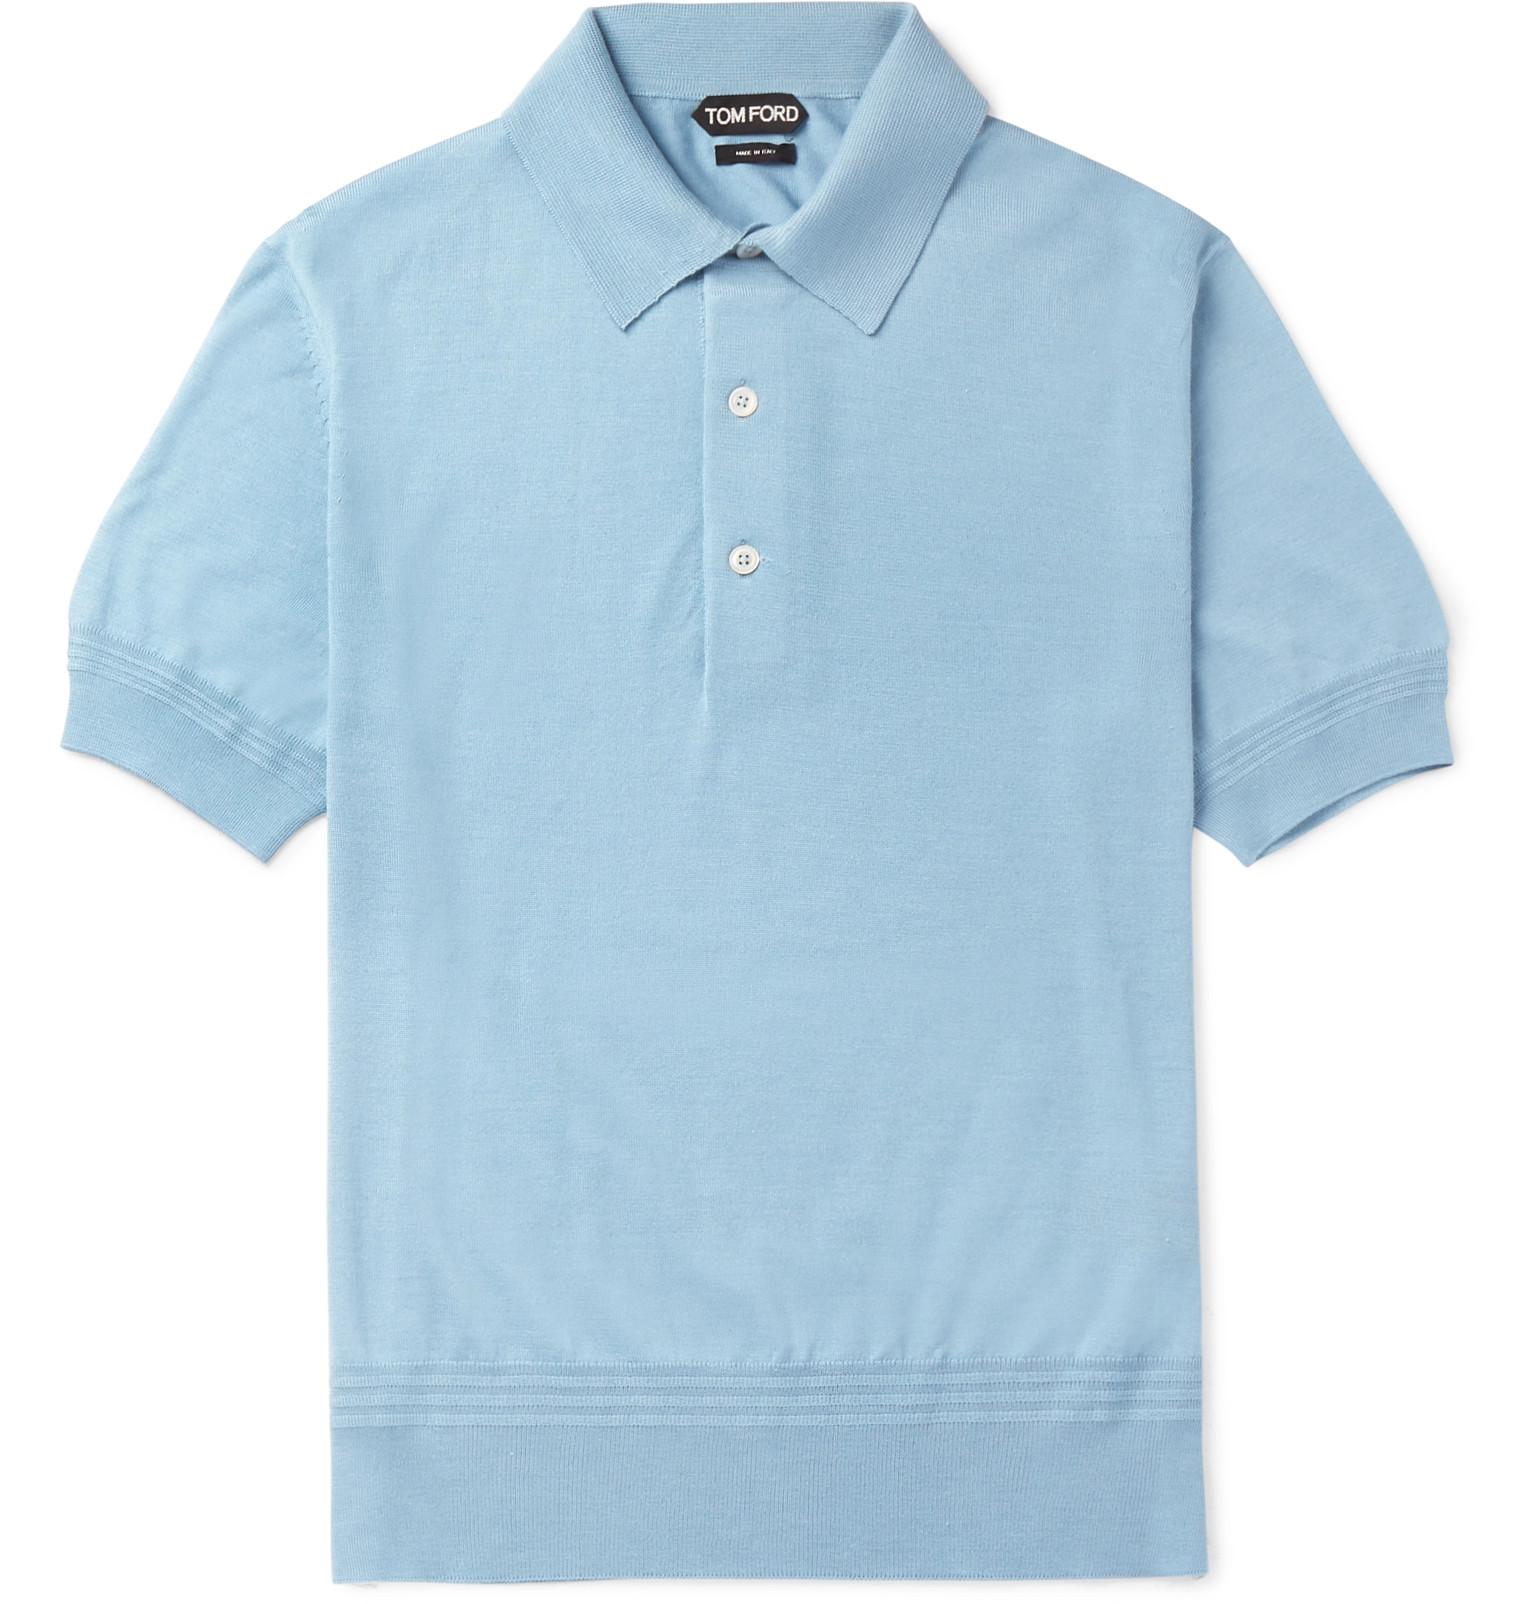 Lyst - Tom Ford Slim-fit Cashmere And Silk-blend Piqué Polo Shirt in ...